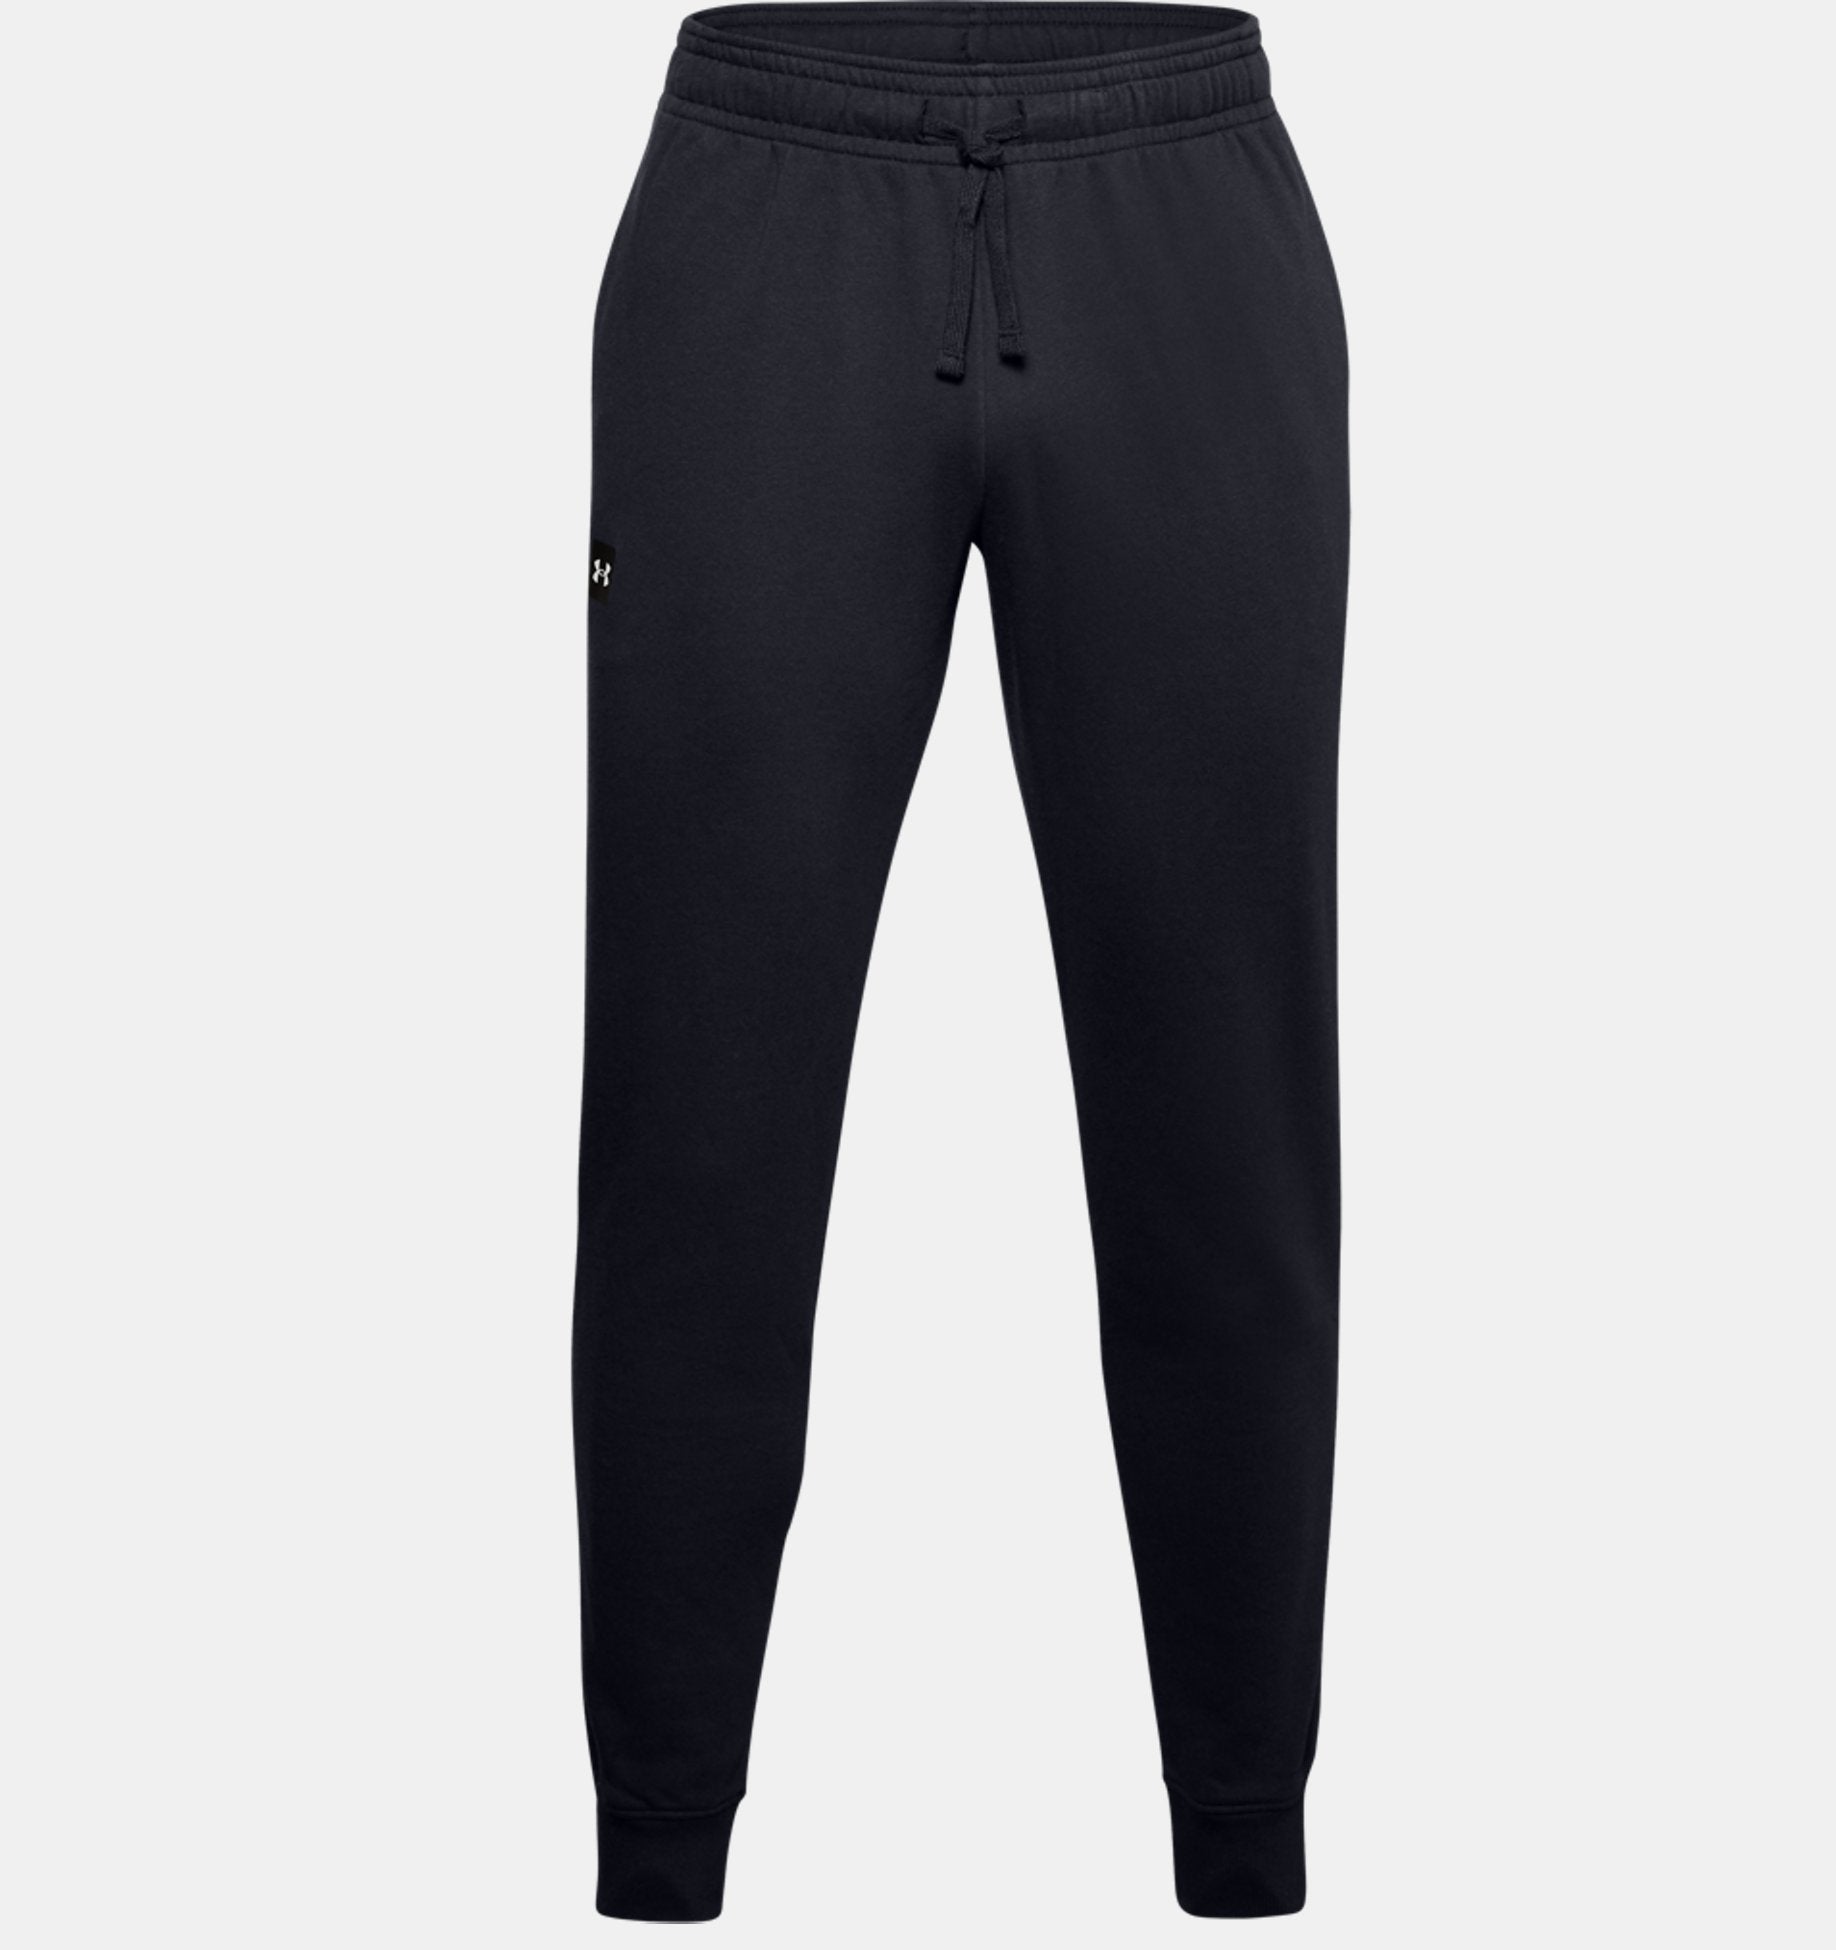  Under Armour Womens Rival Fleece Joggers, White